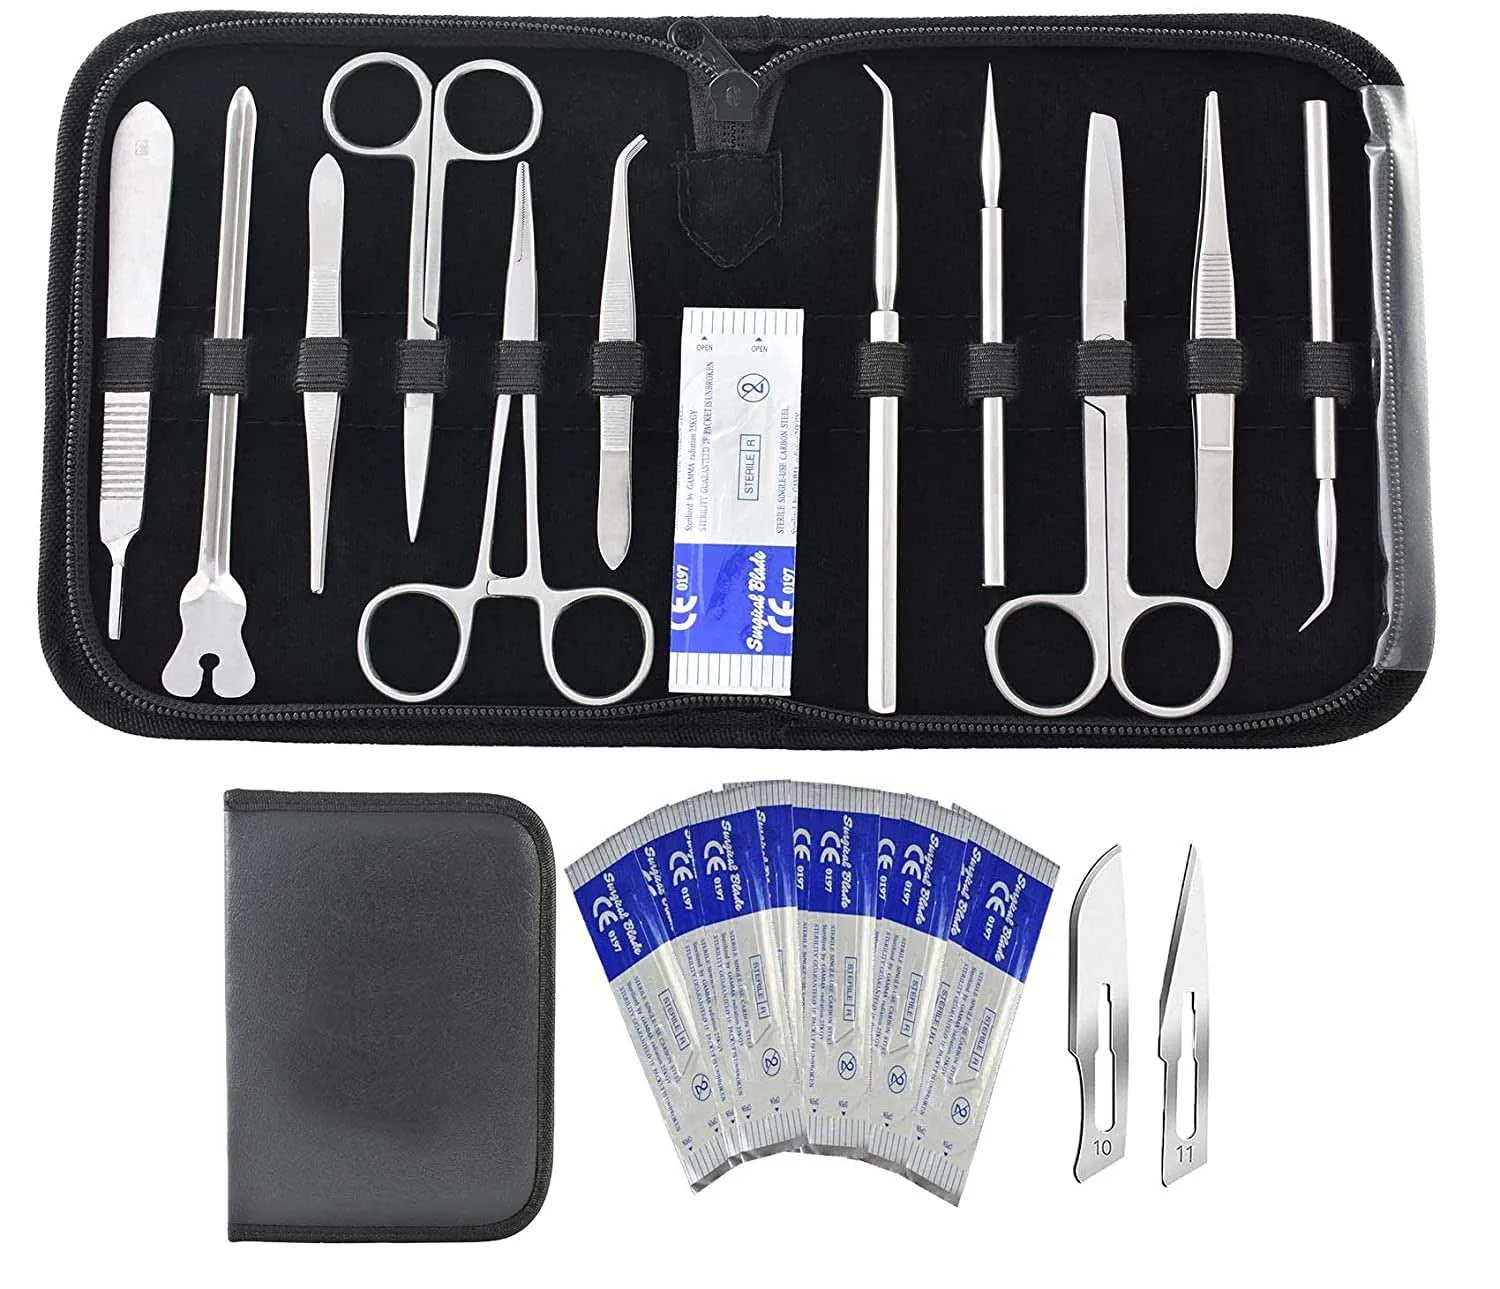 First Aid Tools Medical Nurse Basic Suture Tools STAINLESS STEEL high quality in low price